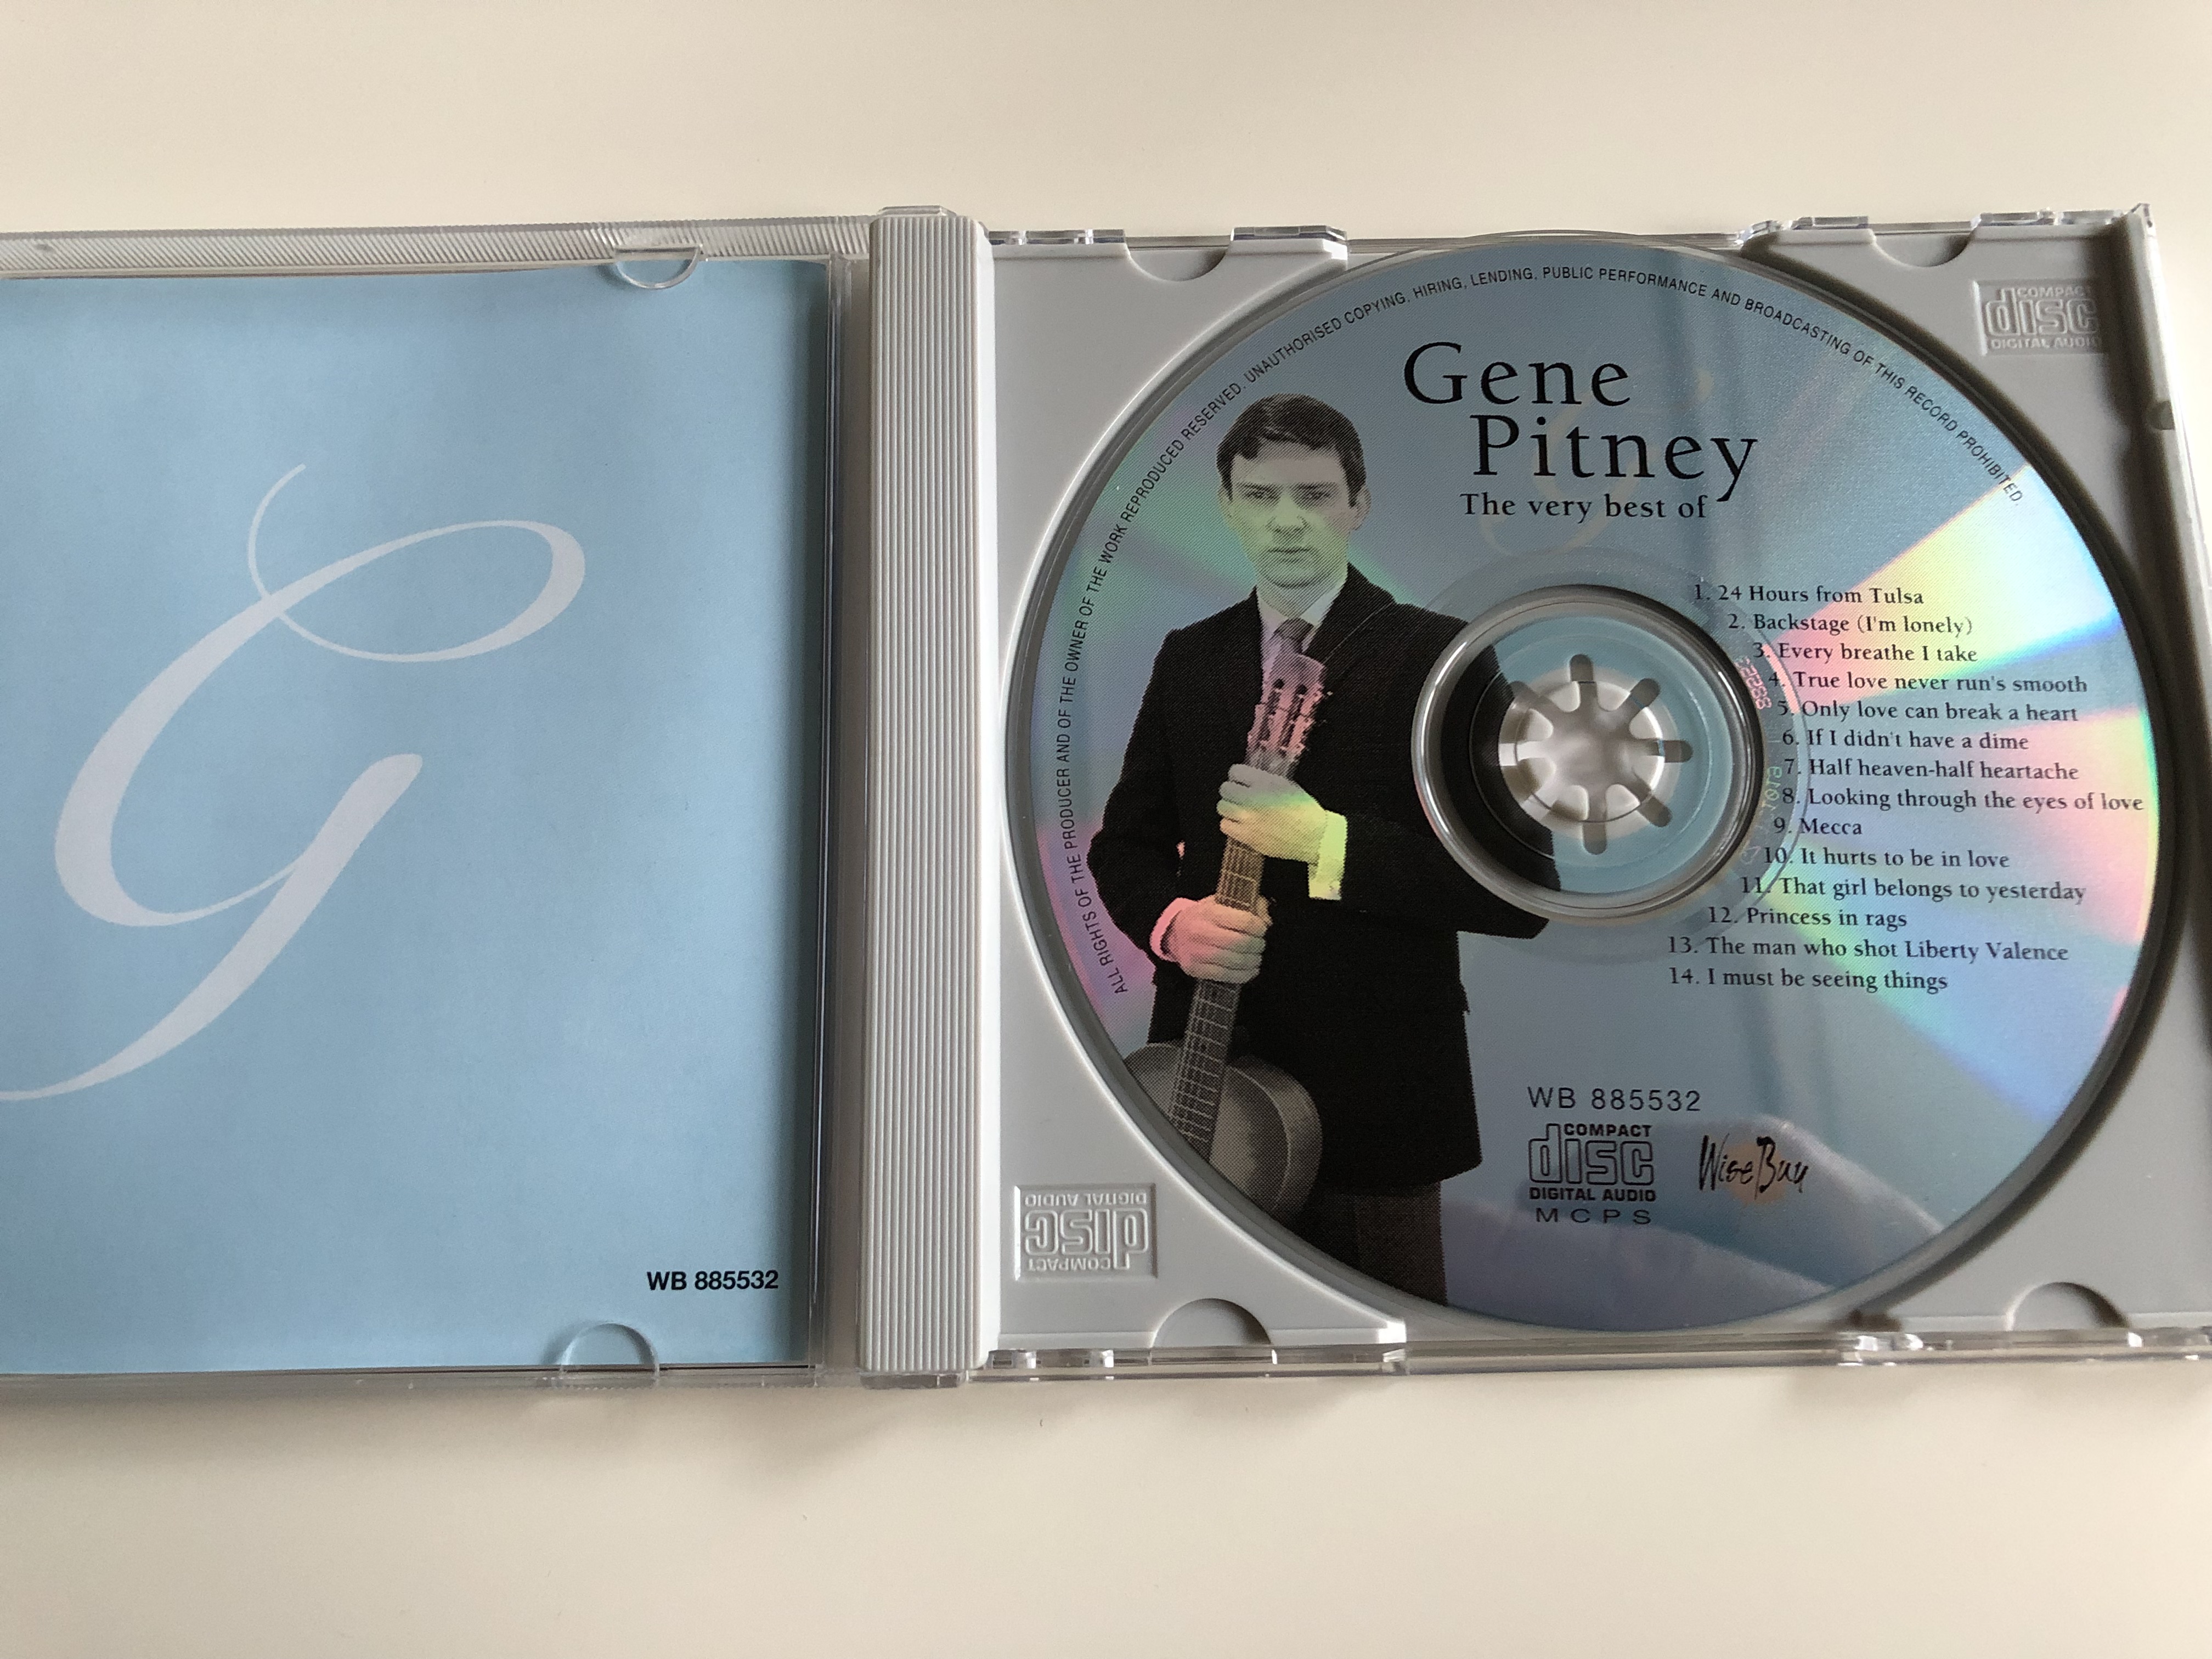 gene-pitney-the-very-best-of-24-hours-from-tulsa-backstage-i-m-lonely-only-love-can-break-a-heart-it-hurts-to-be-in-love-tha-man-who-shot-liberty-valence-wise-buy-audio-cd-1998-wb-8855-3-.jpg